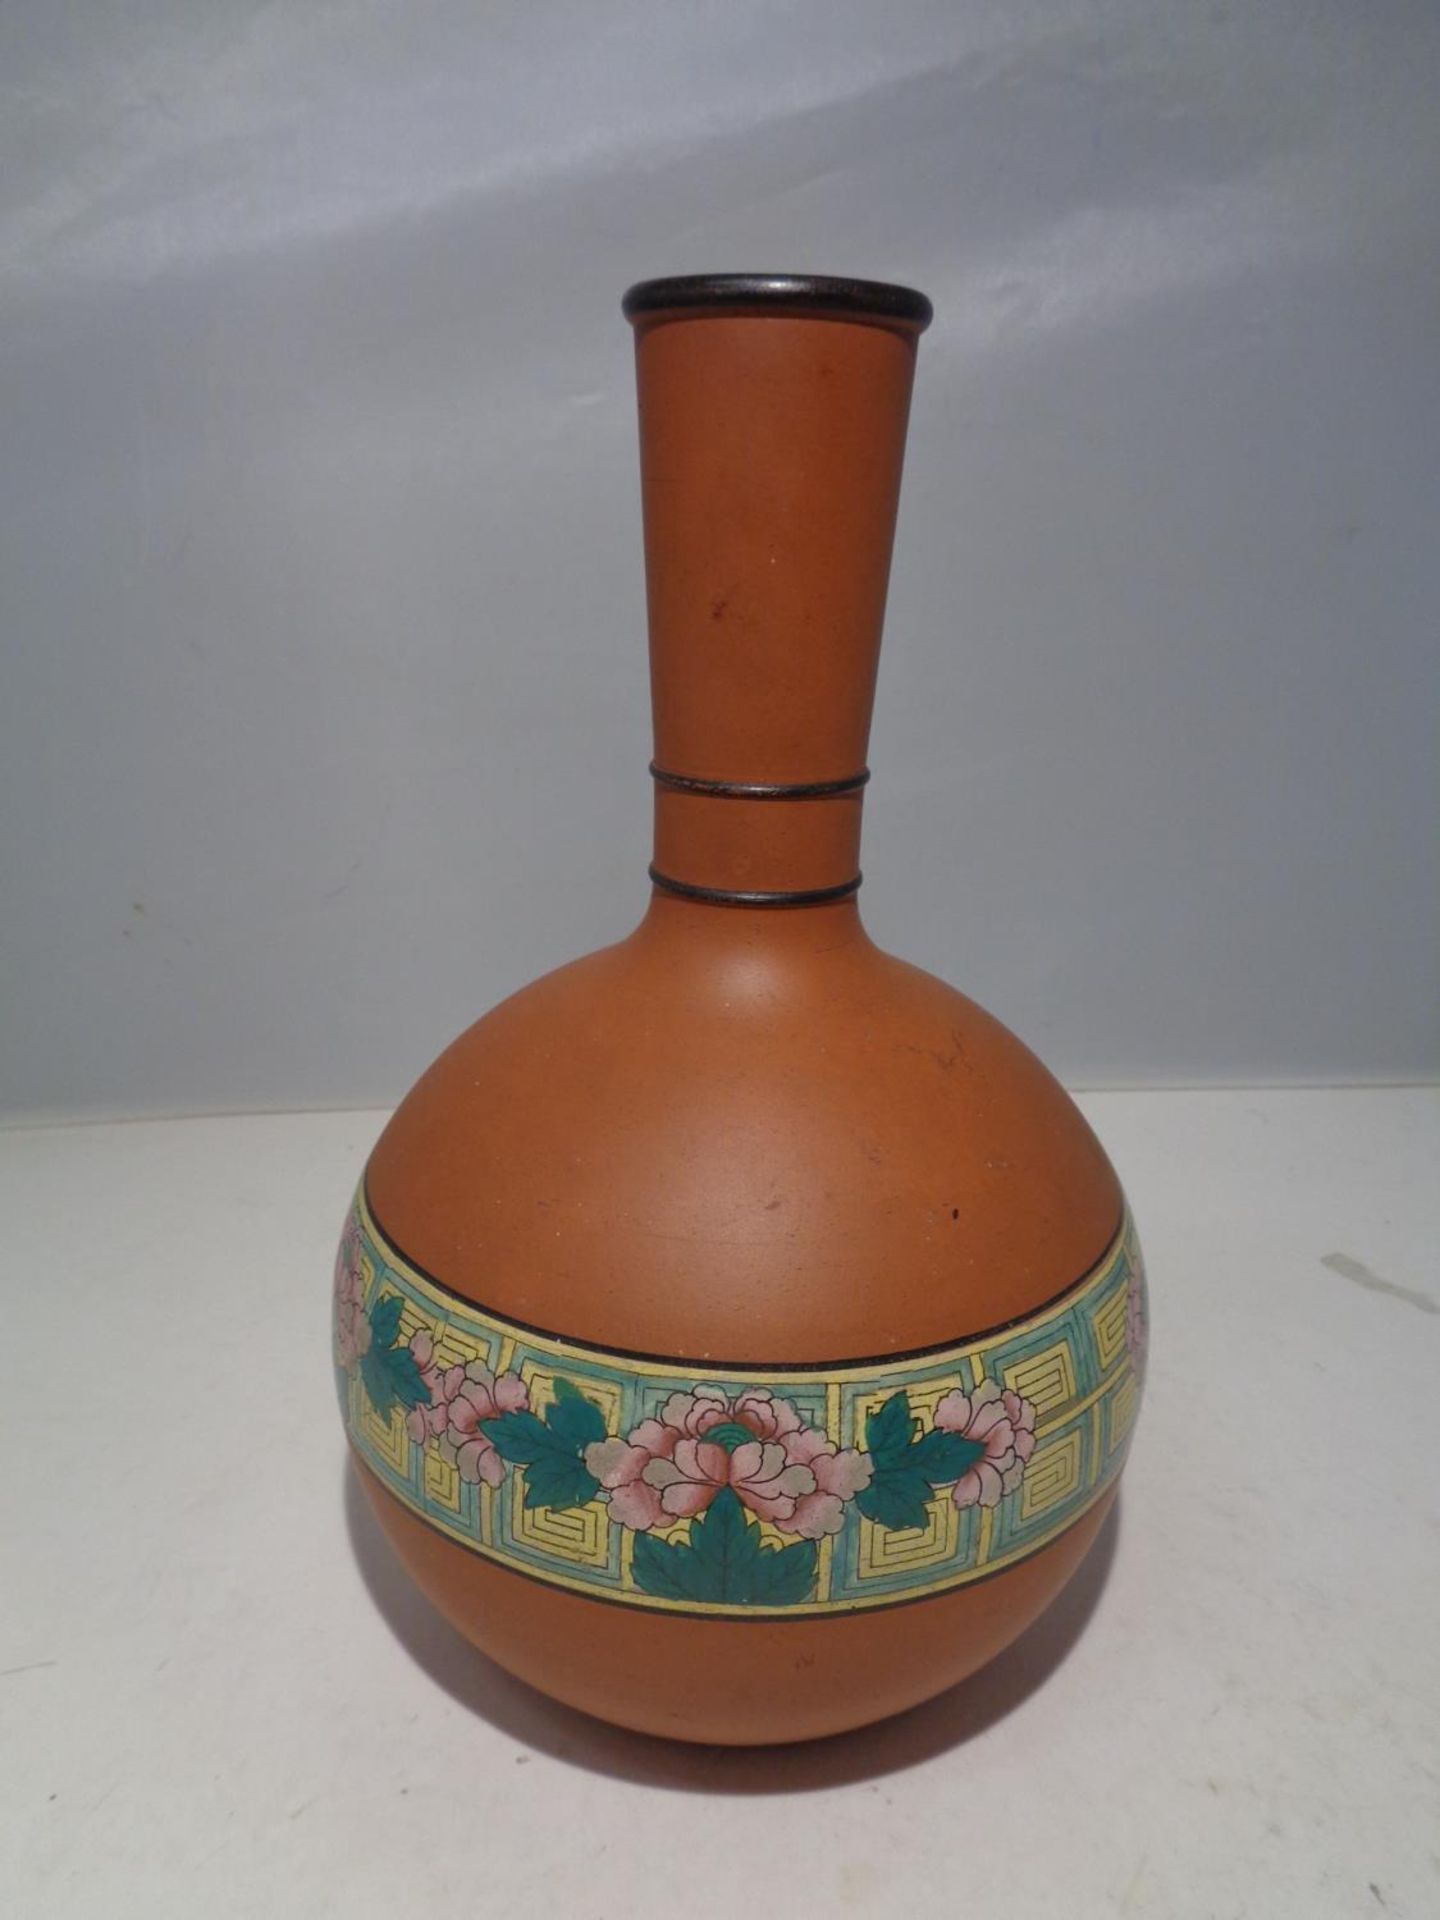 A DB &CO ETRURIA TERRACOTTA VASE WITH A FLOWER DESIGN